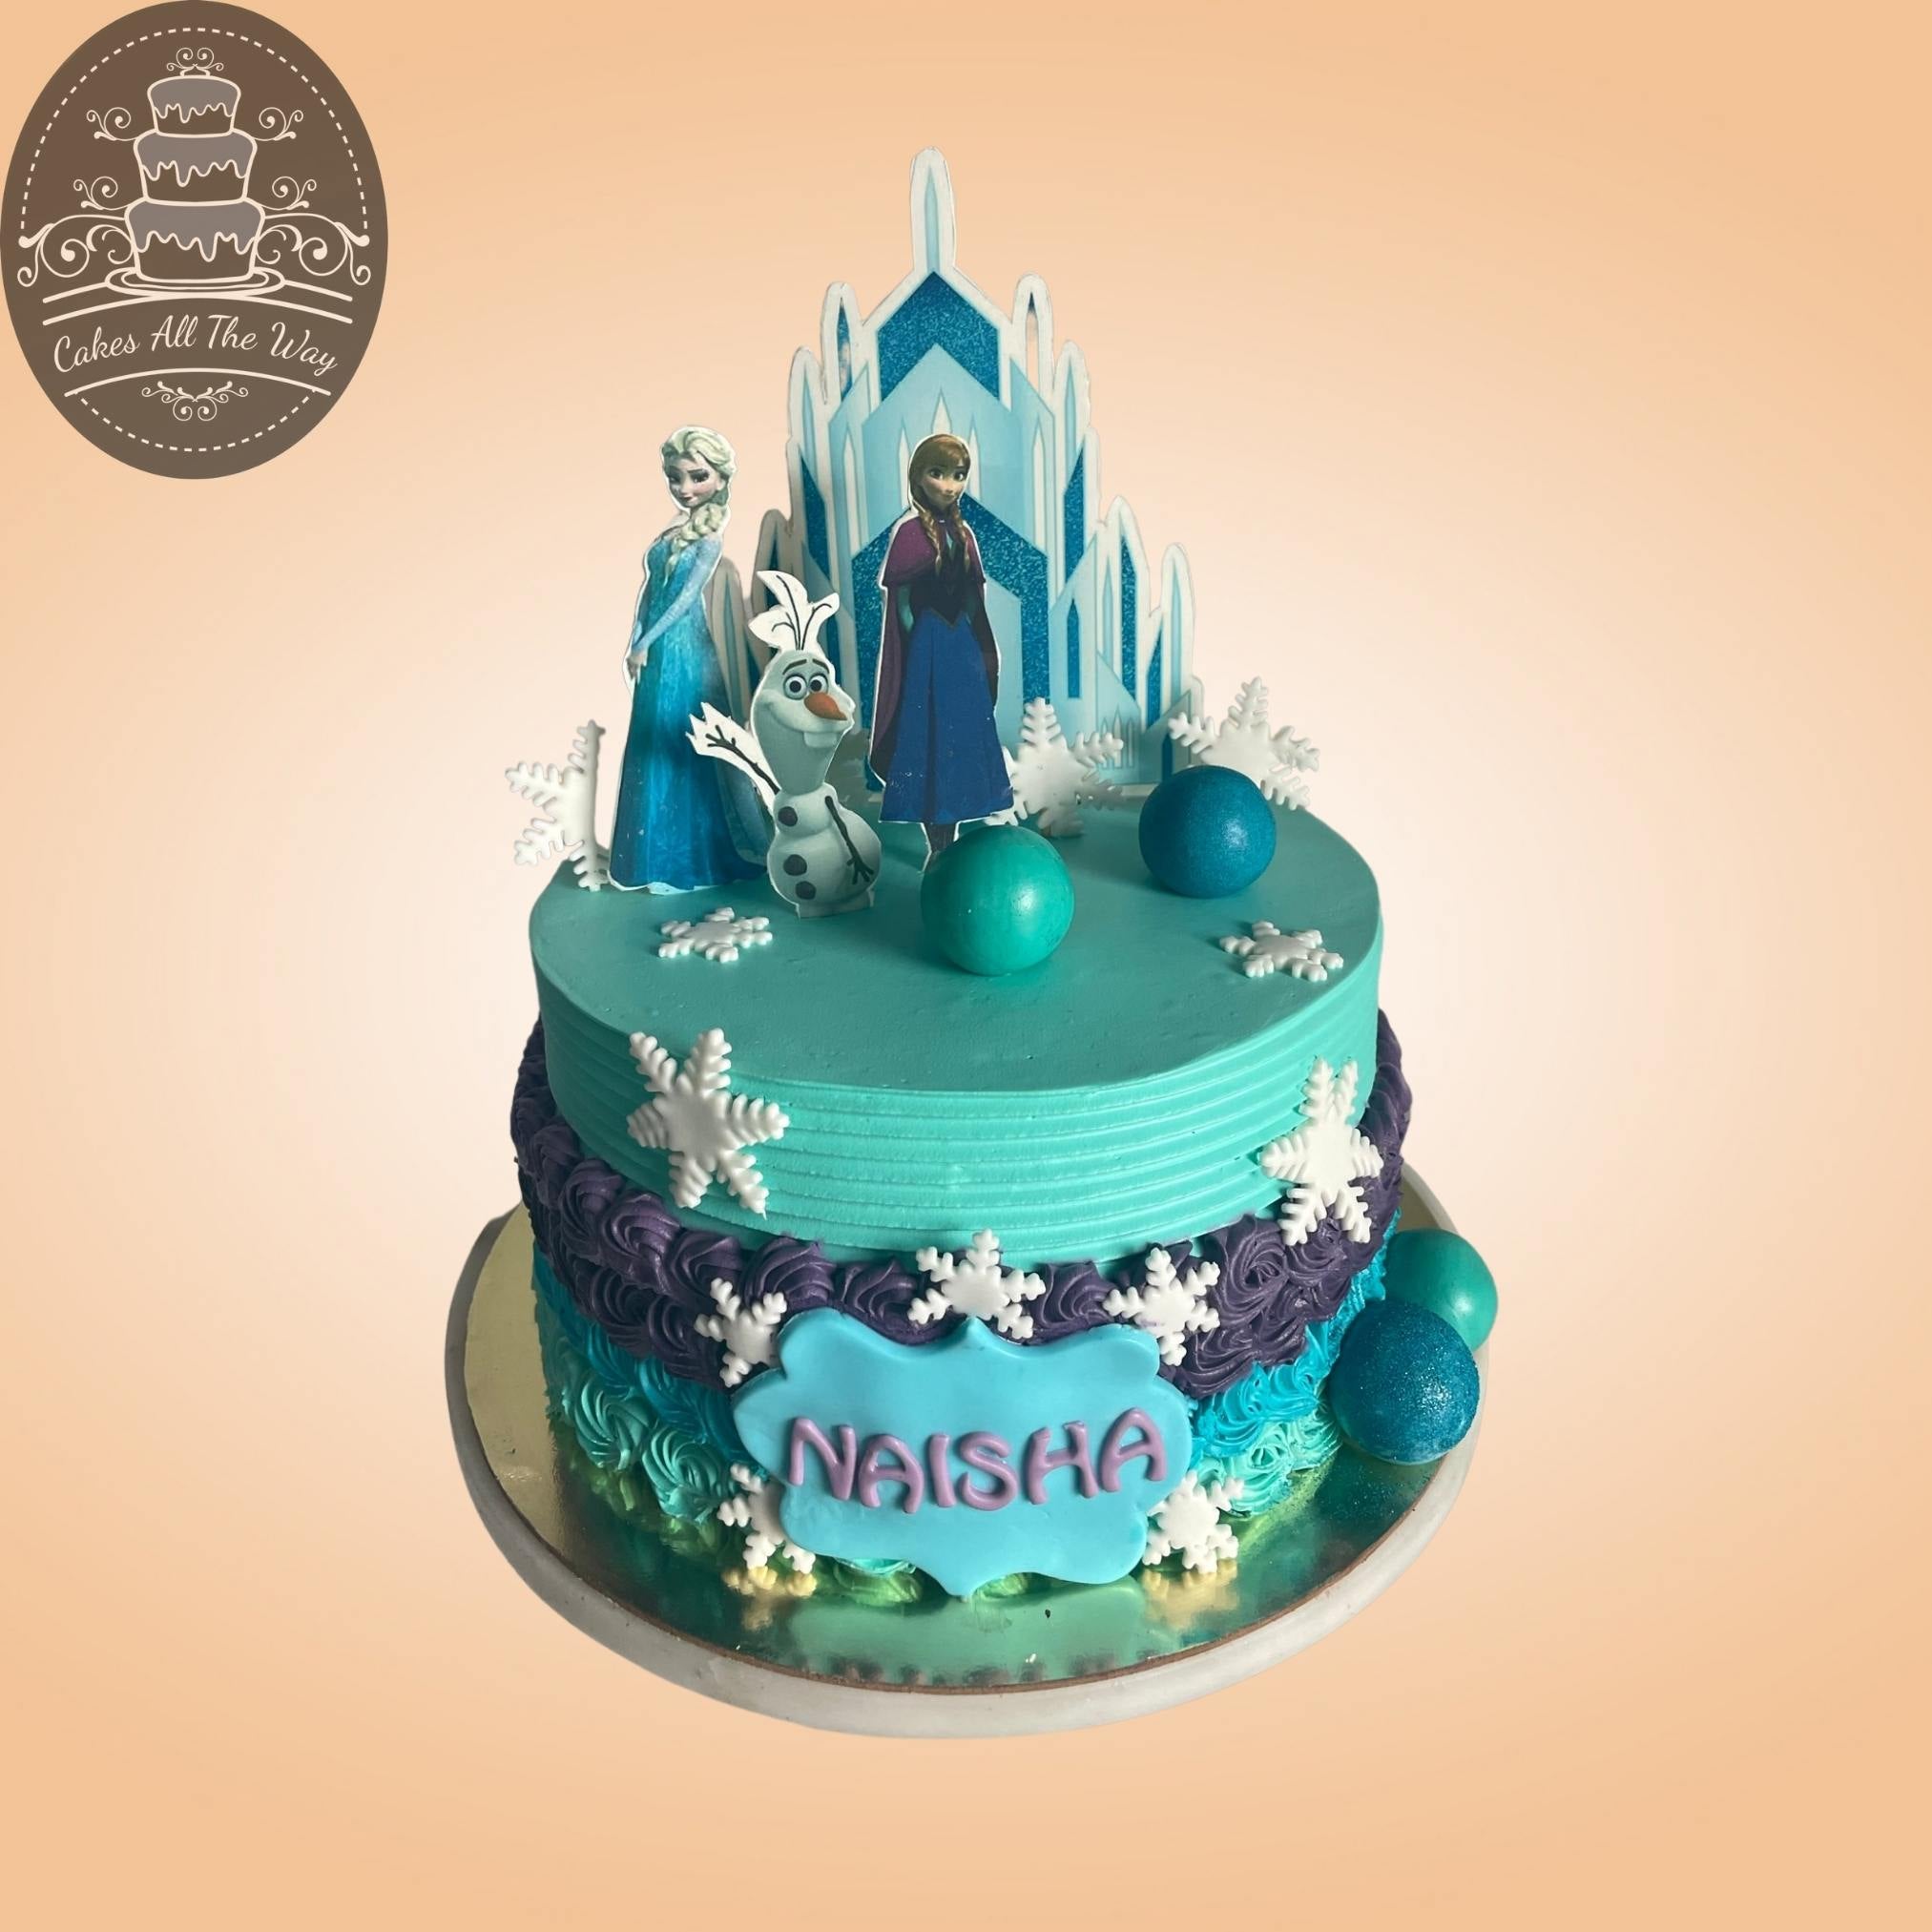 Cakes Land Egypt - #frozen #cake from our kids characters album in fb page  #girls #princess #elsa #anna #frozen #kitty #girlsbirthday #cakes #kids  #sugarart #birthday #instafood #instacake #birthdaycake #kids #boys #girls  #party #